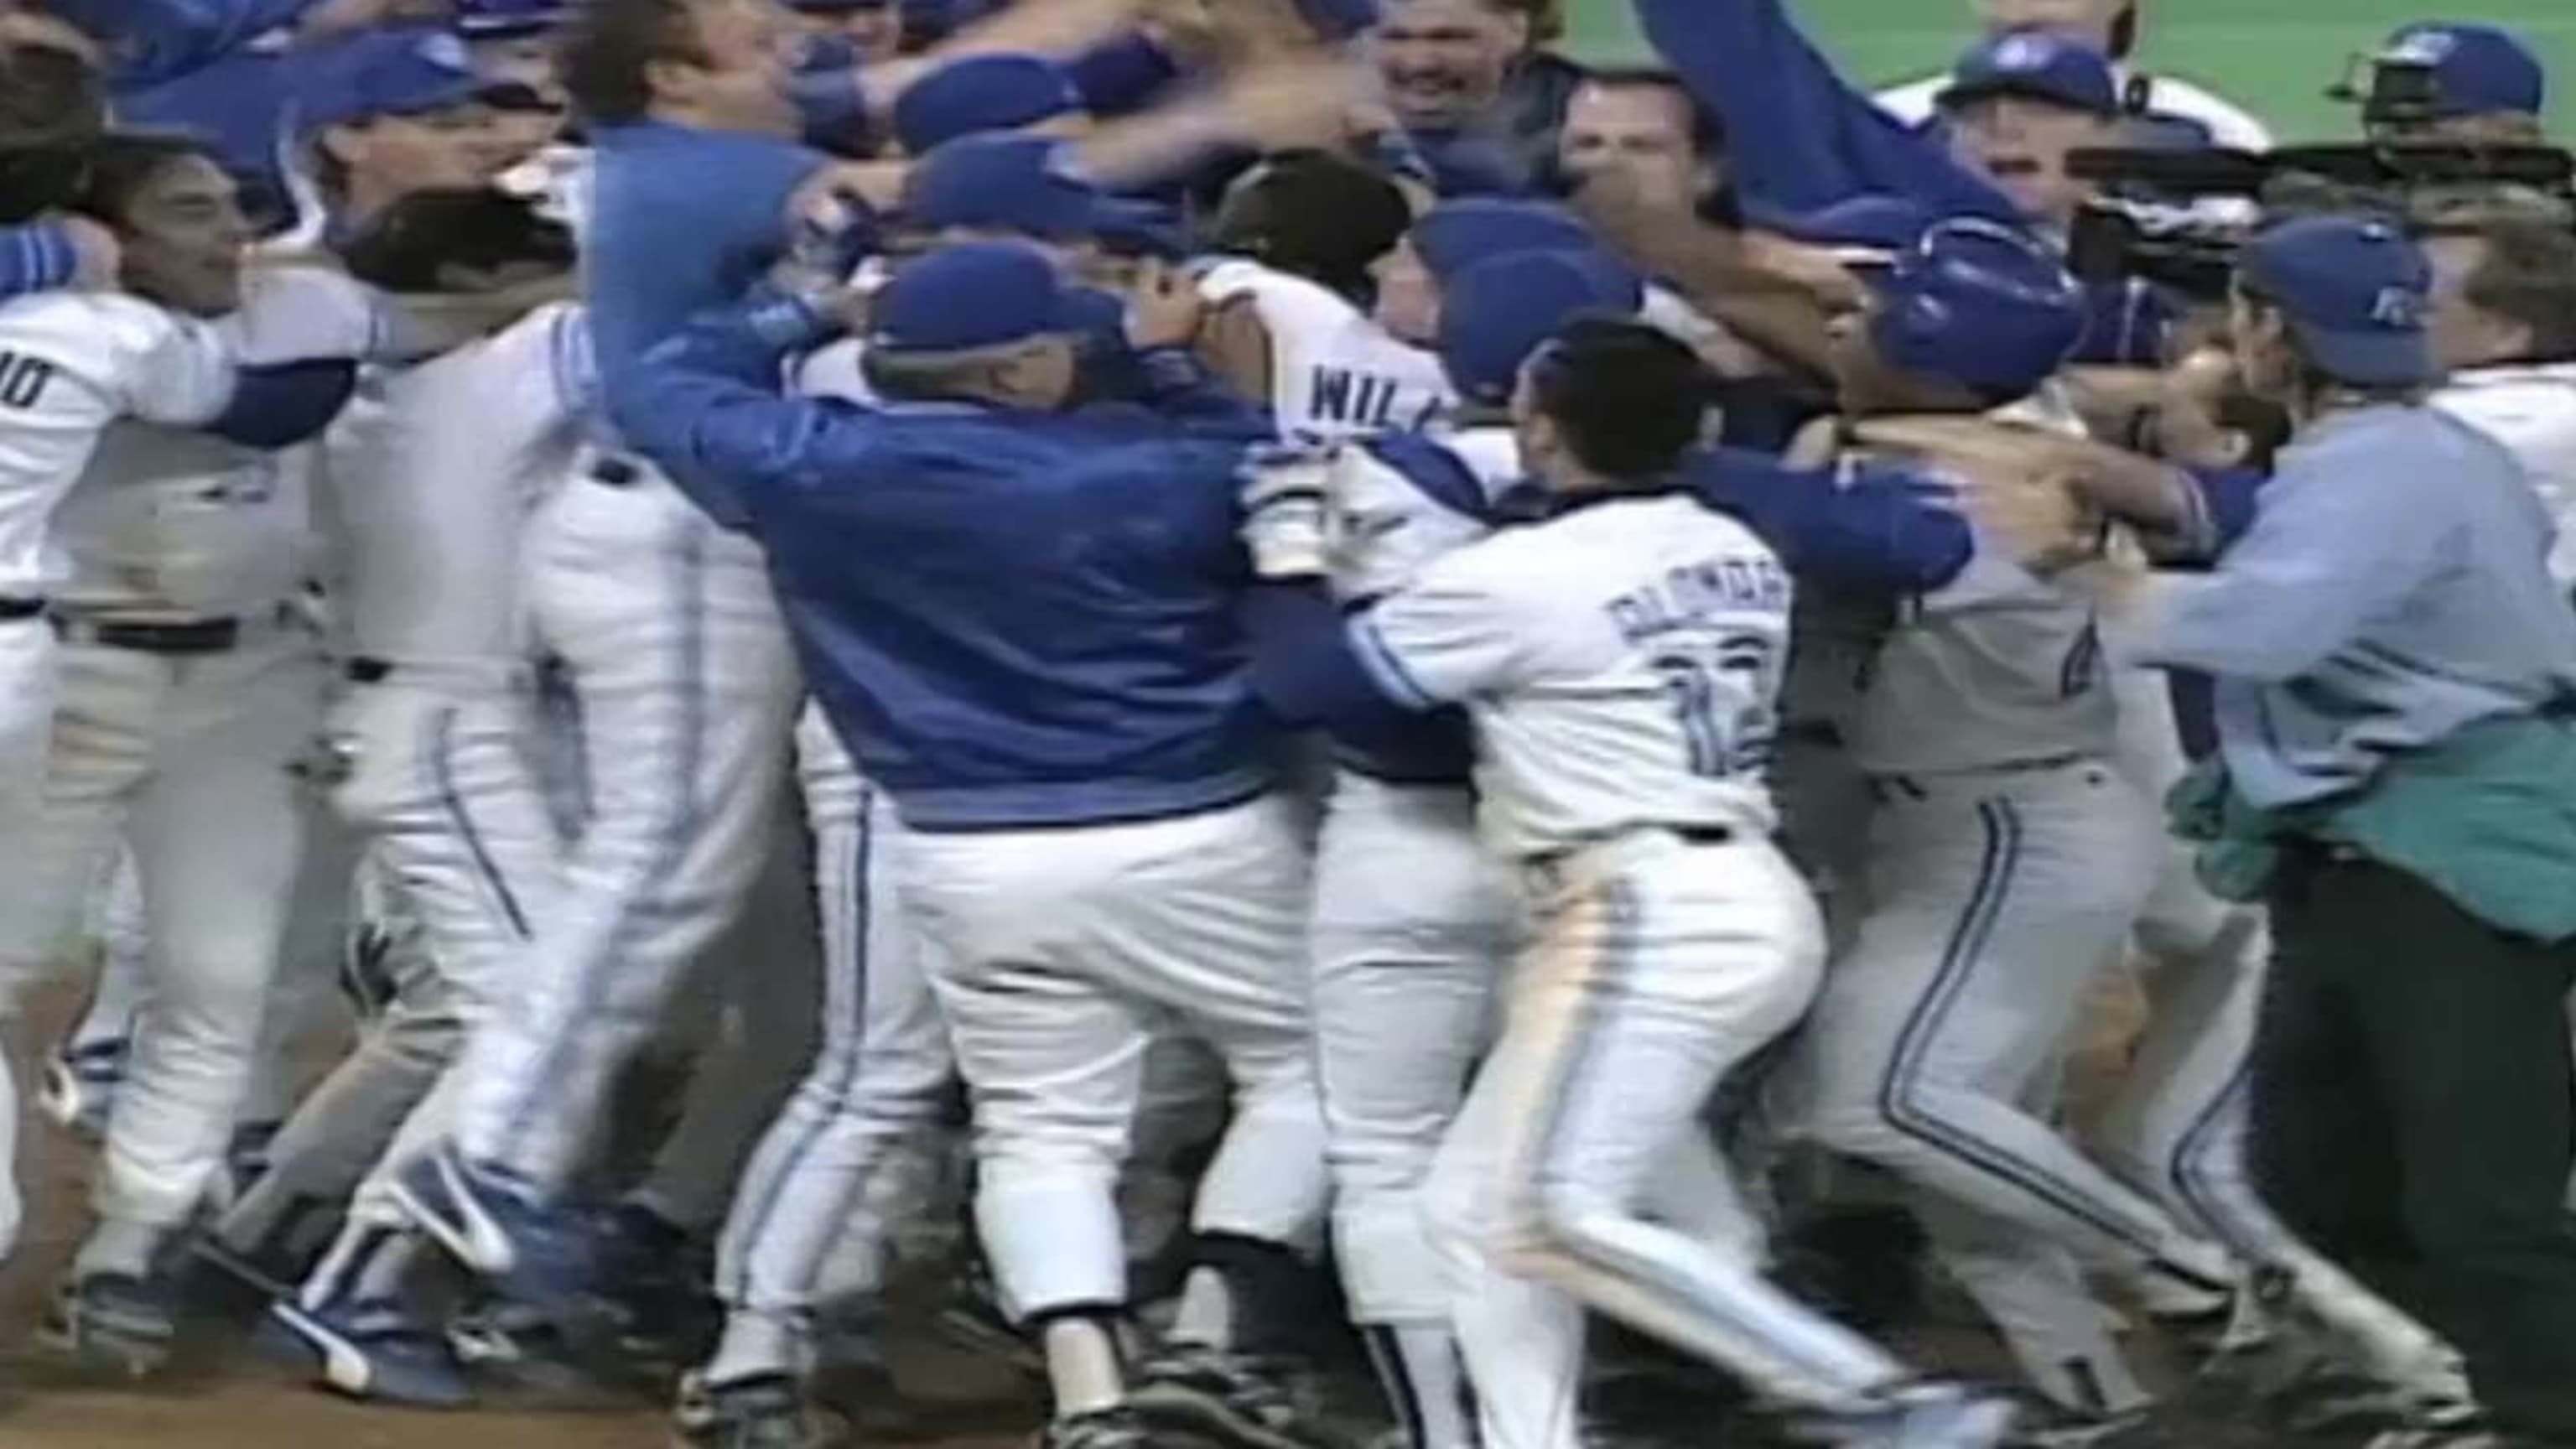 October 23rd, 1993 - World Series - Game 6 - Phillies vs Blue Jays